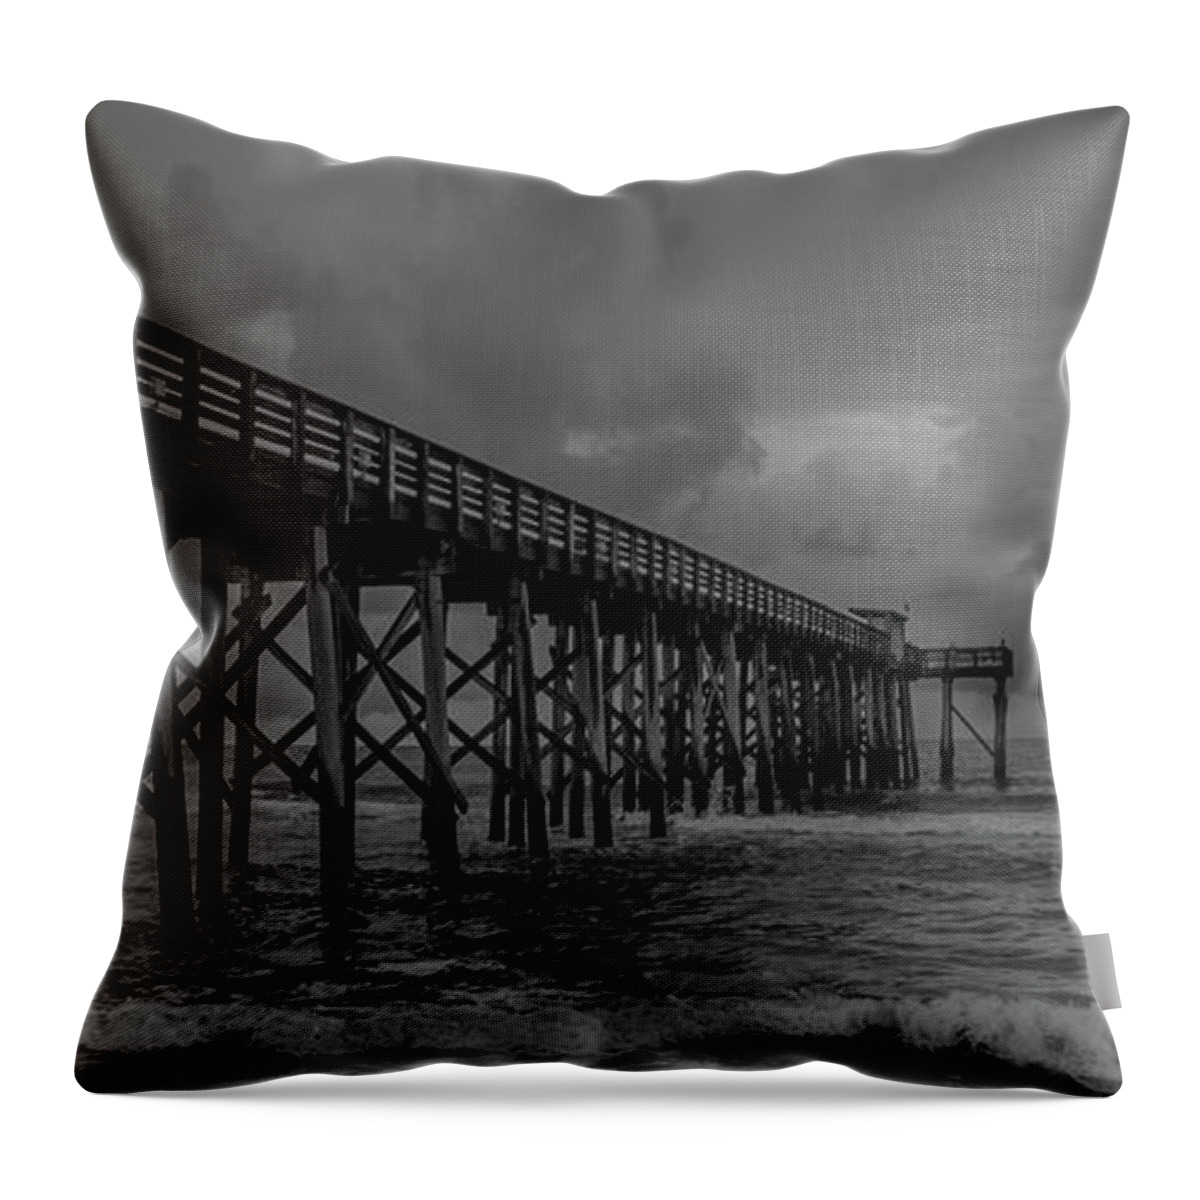 Ocean Throw Pillow featuring the photograph The Pier by Jamie Tyler